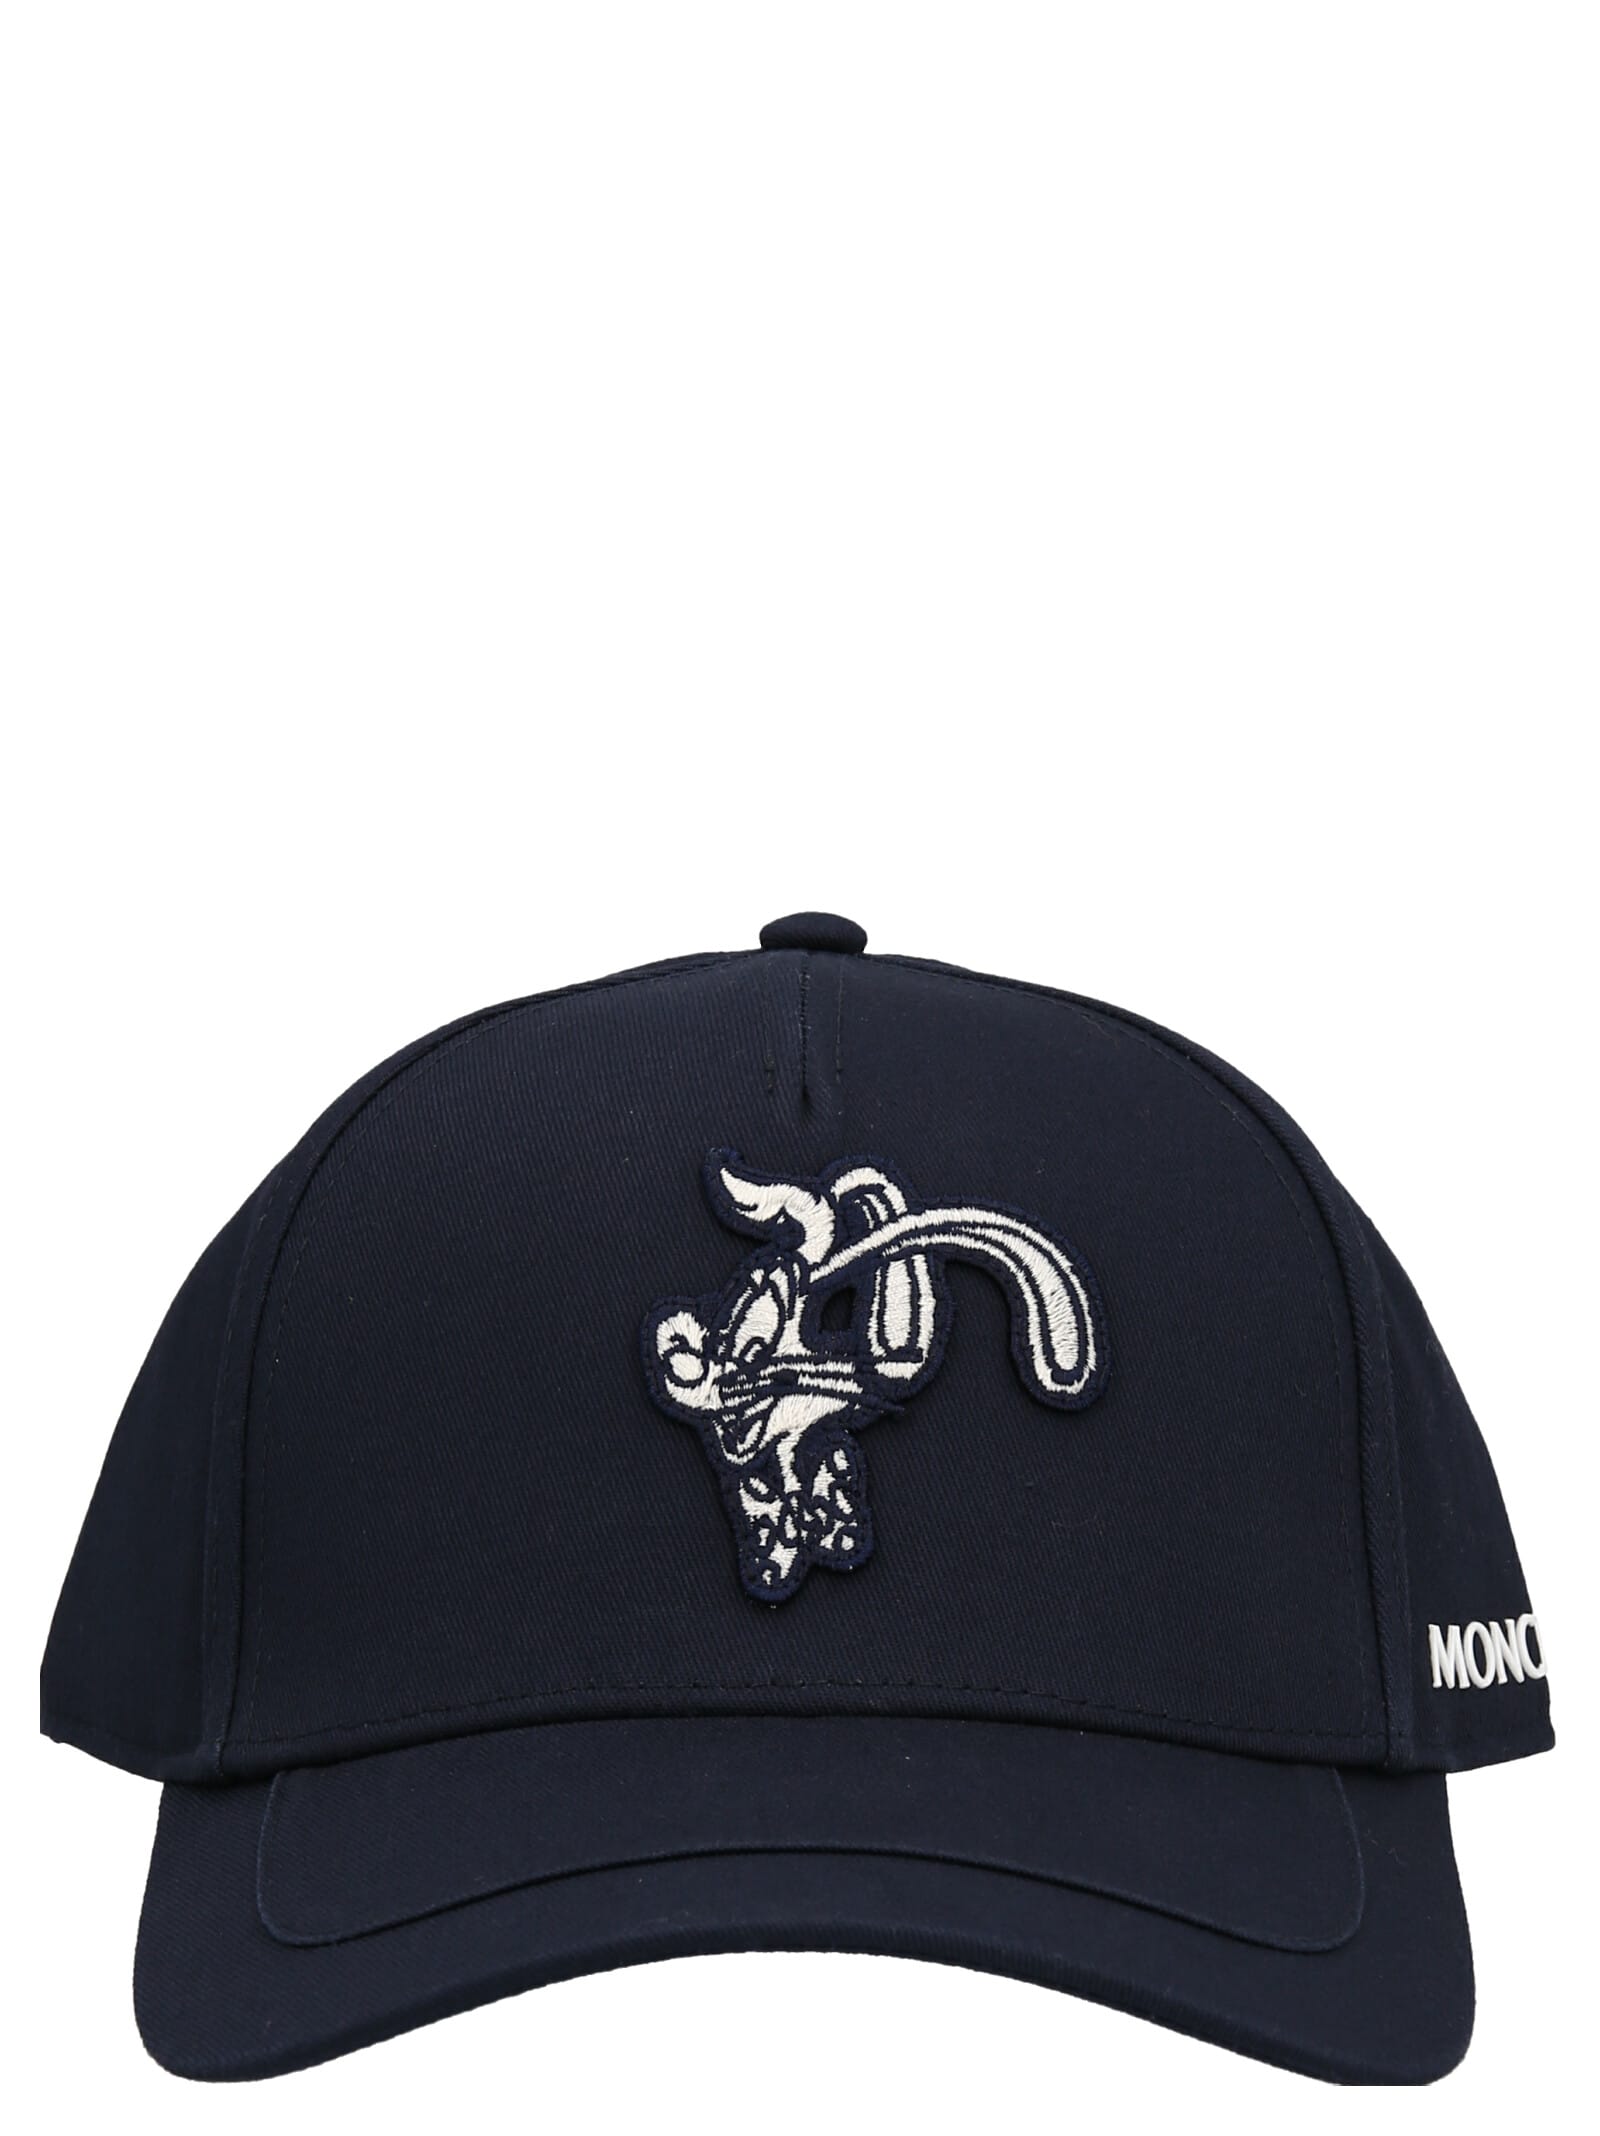 Moncler Chinese New Year Capsule Cap